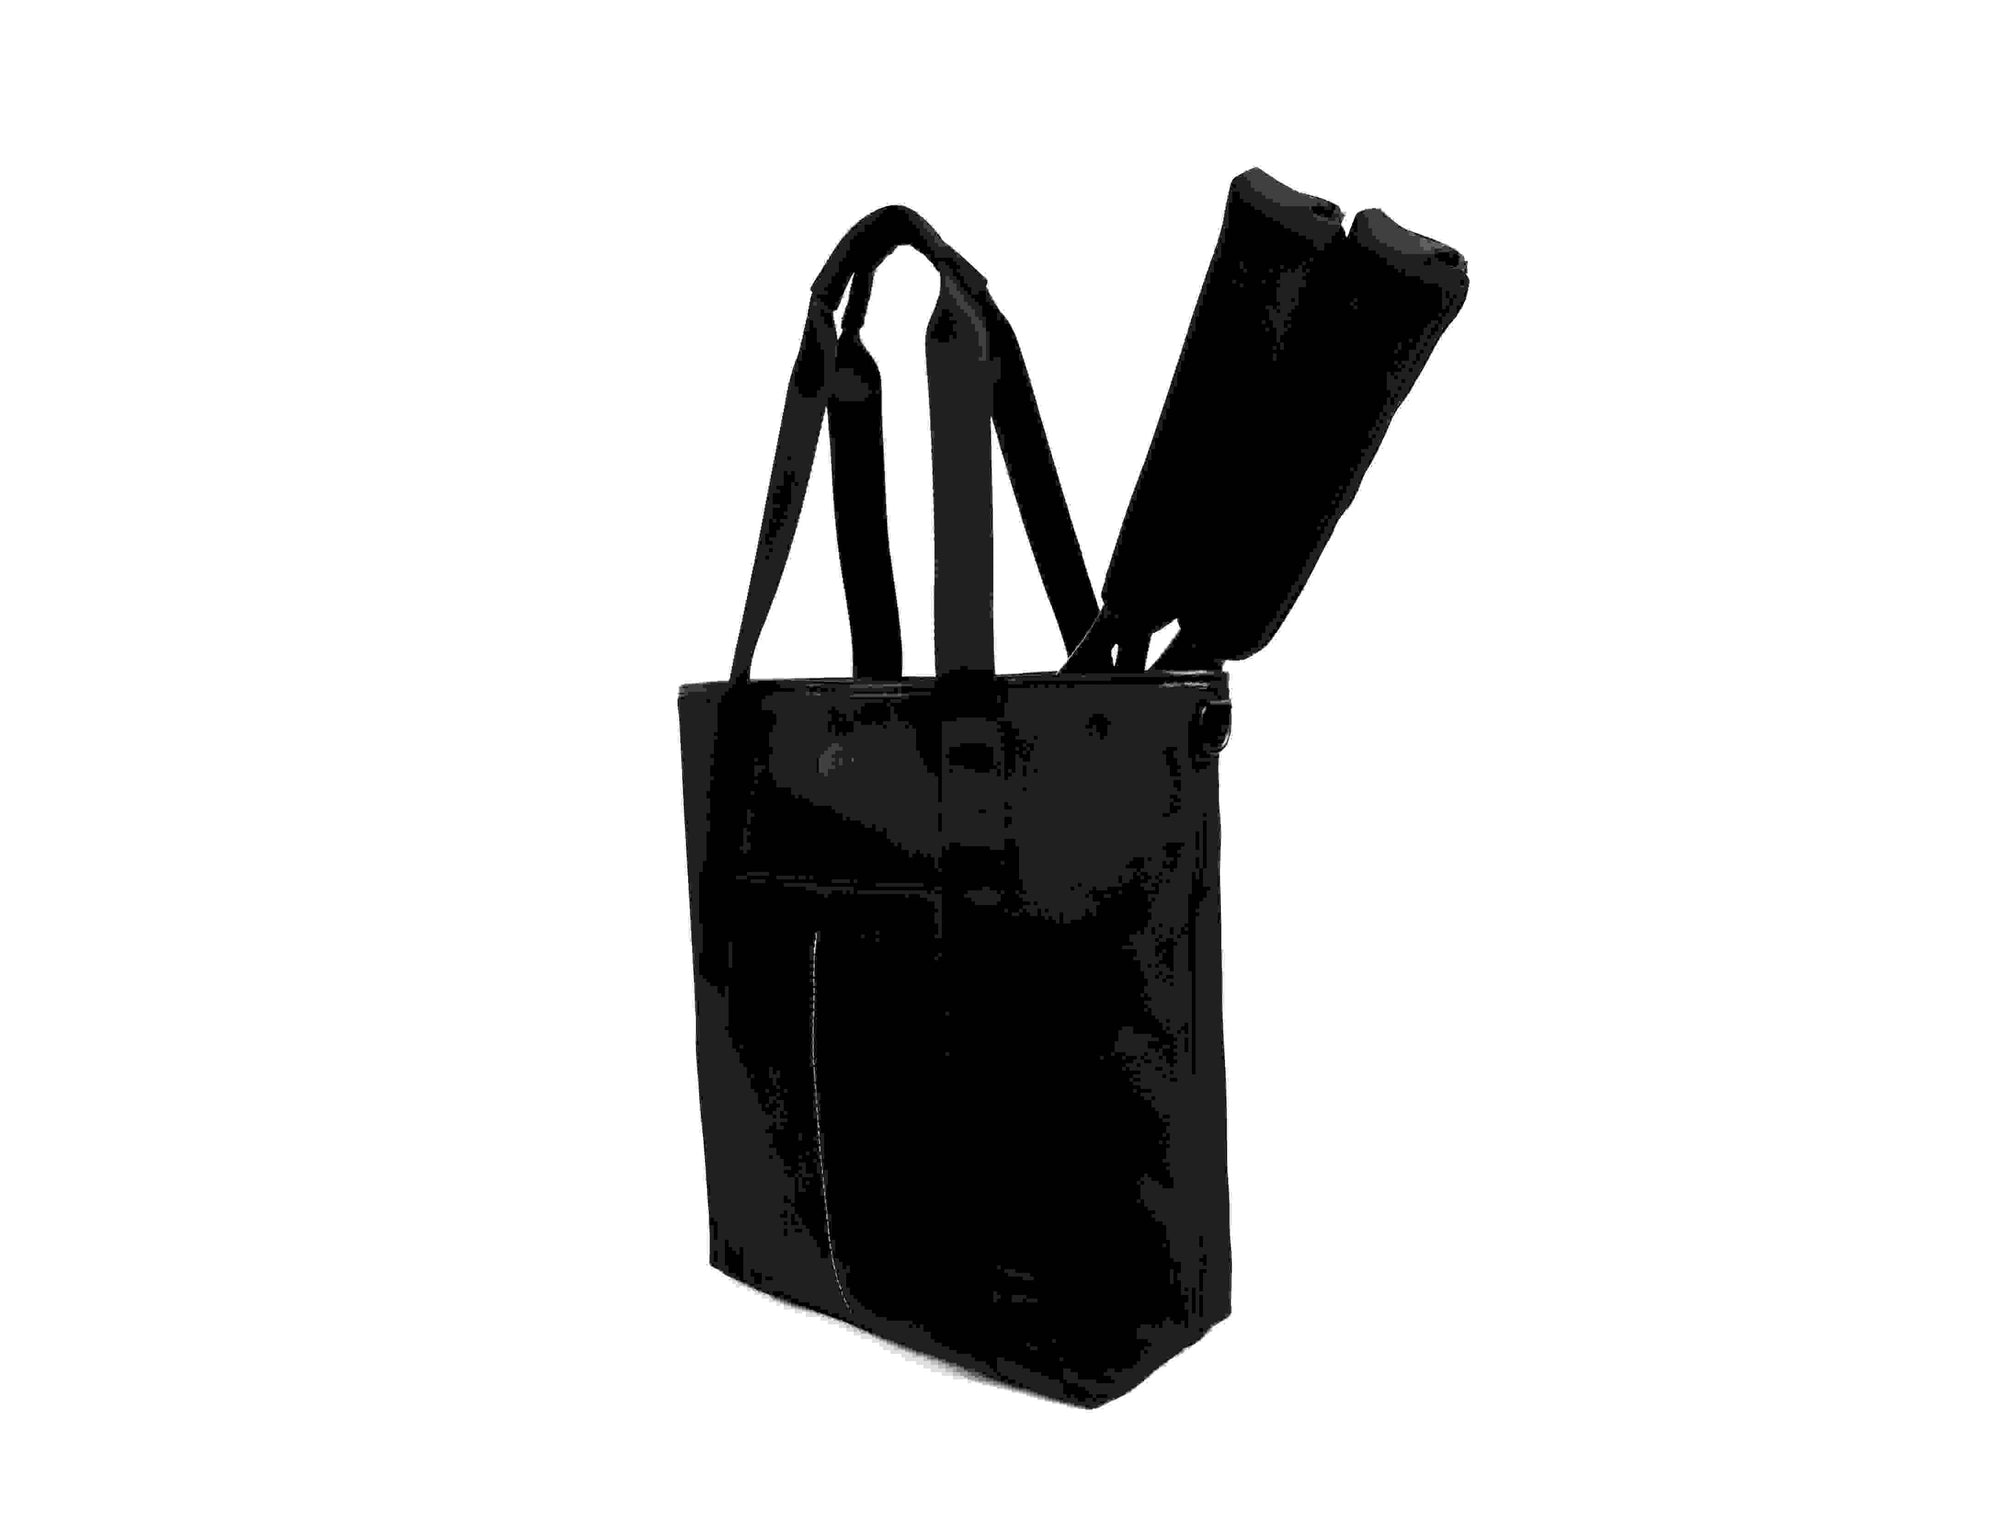 Transition Tote v2 for tennis, pickleball, padel and all racket sports